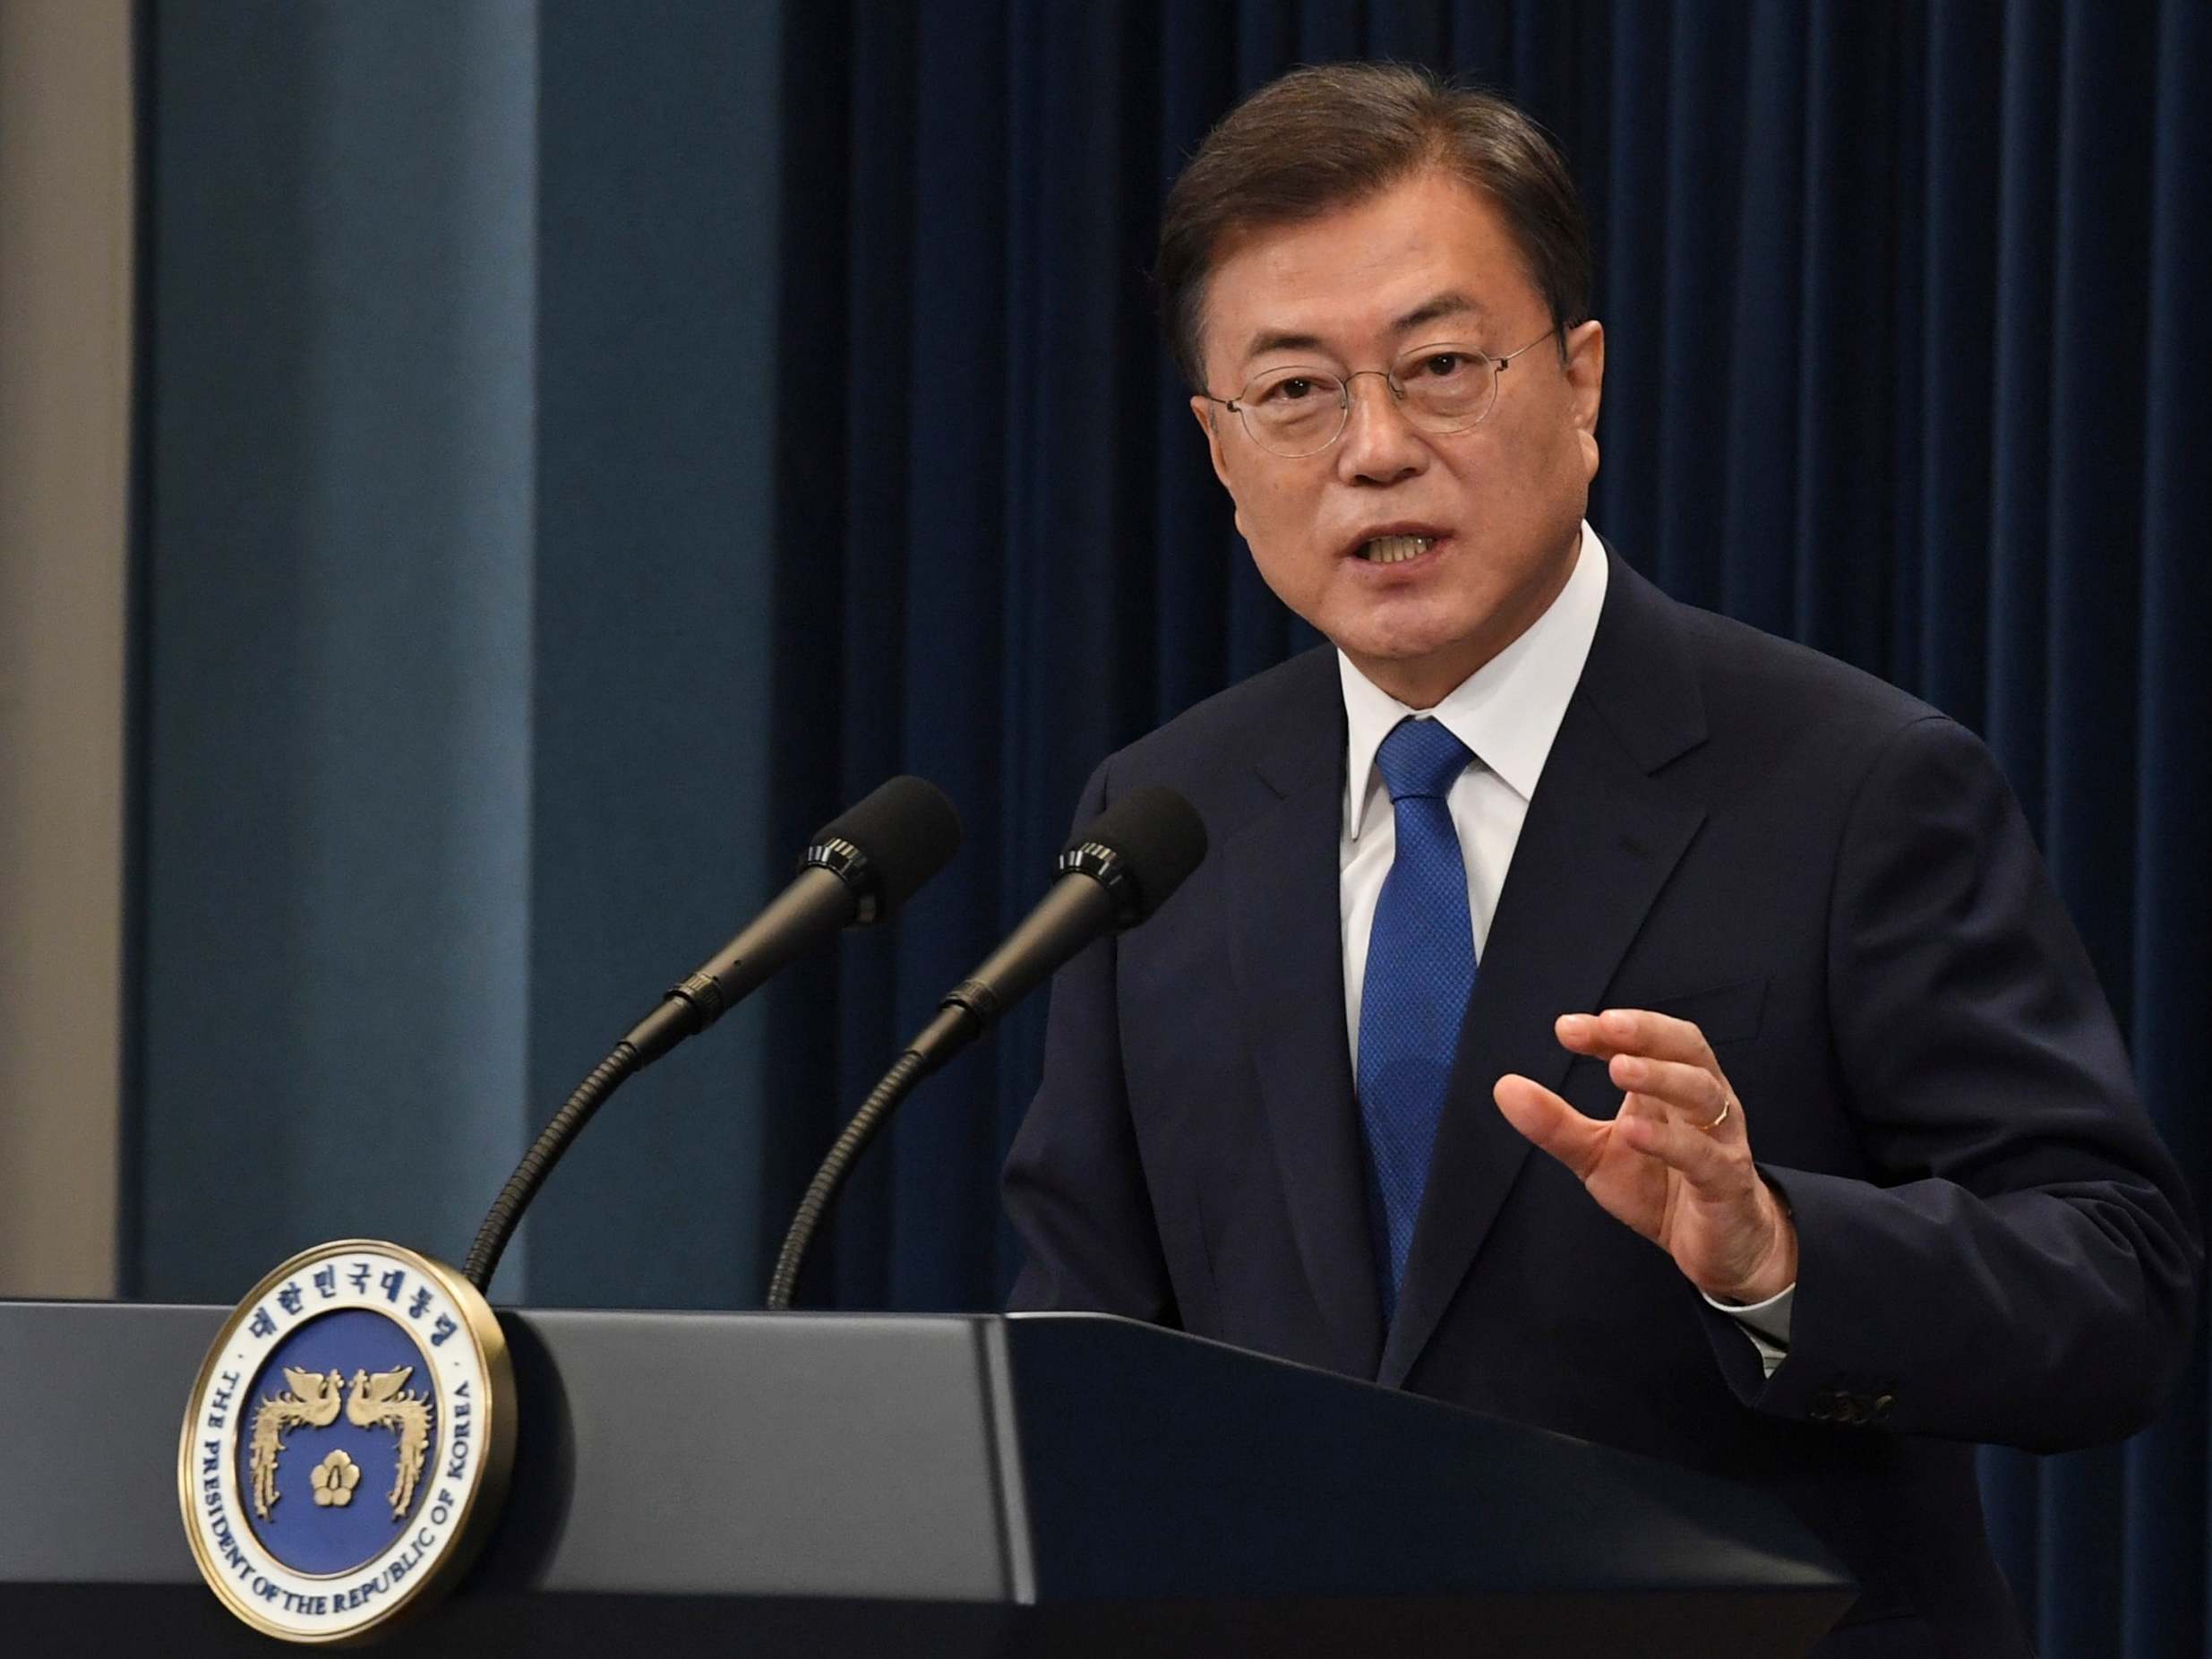 South Korea's president Moon Jae-in has said there is 'no reason to stand still out of fear' over the rise in cases